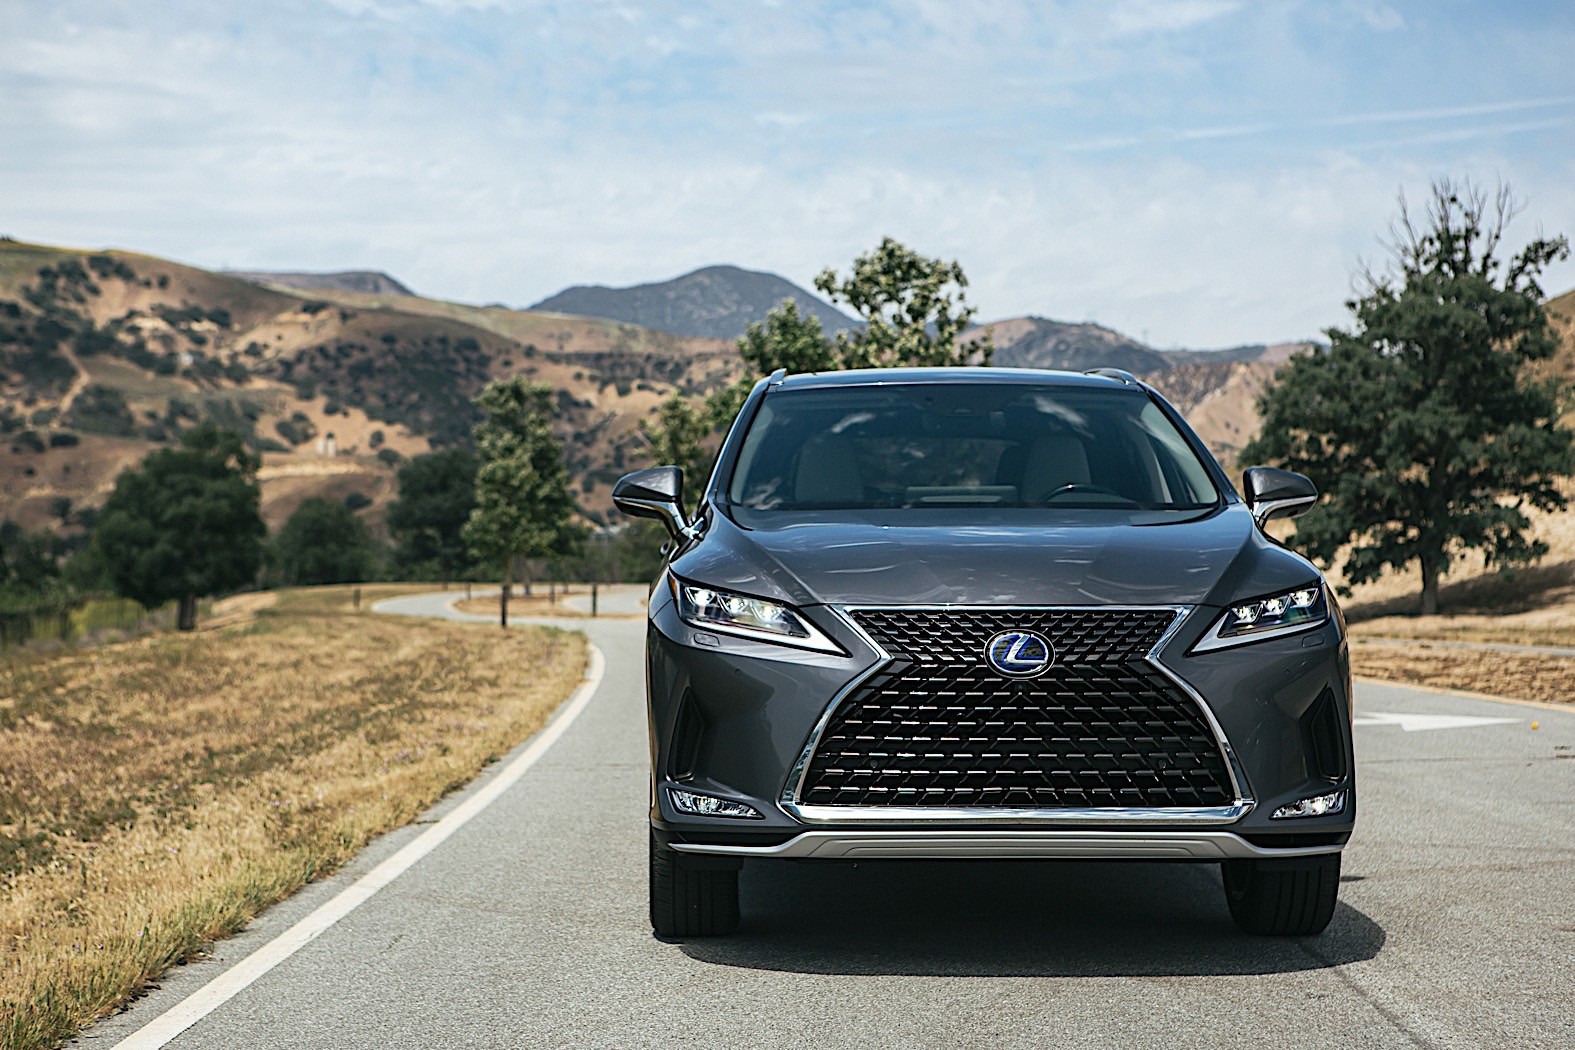 2020 lexus rx breaks cover with android auto for the first time_11